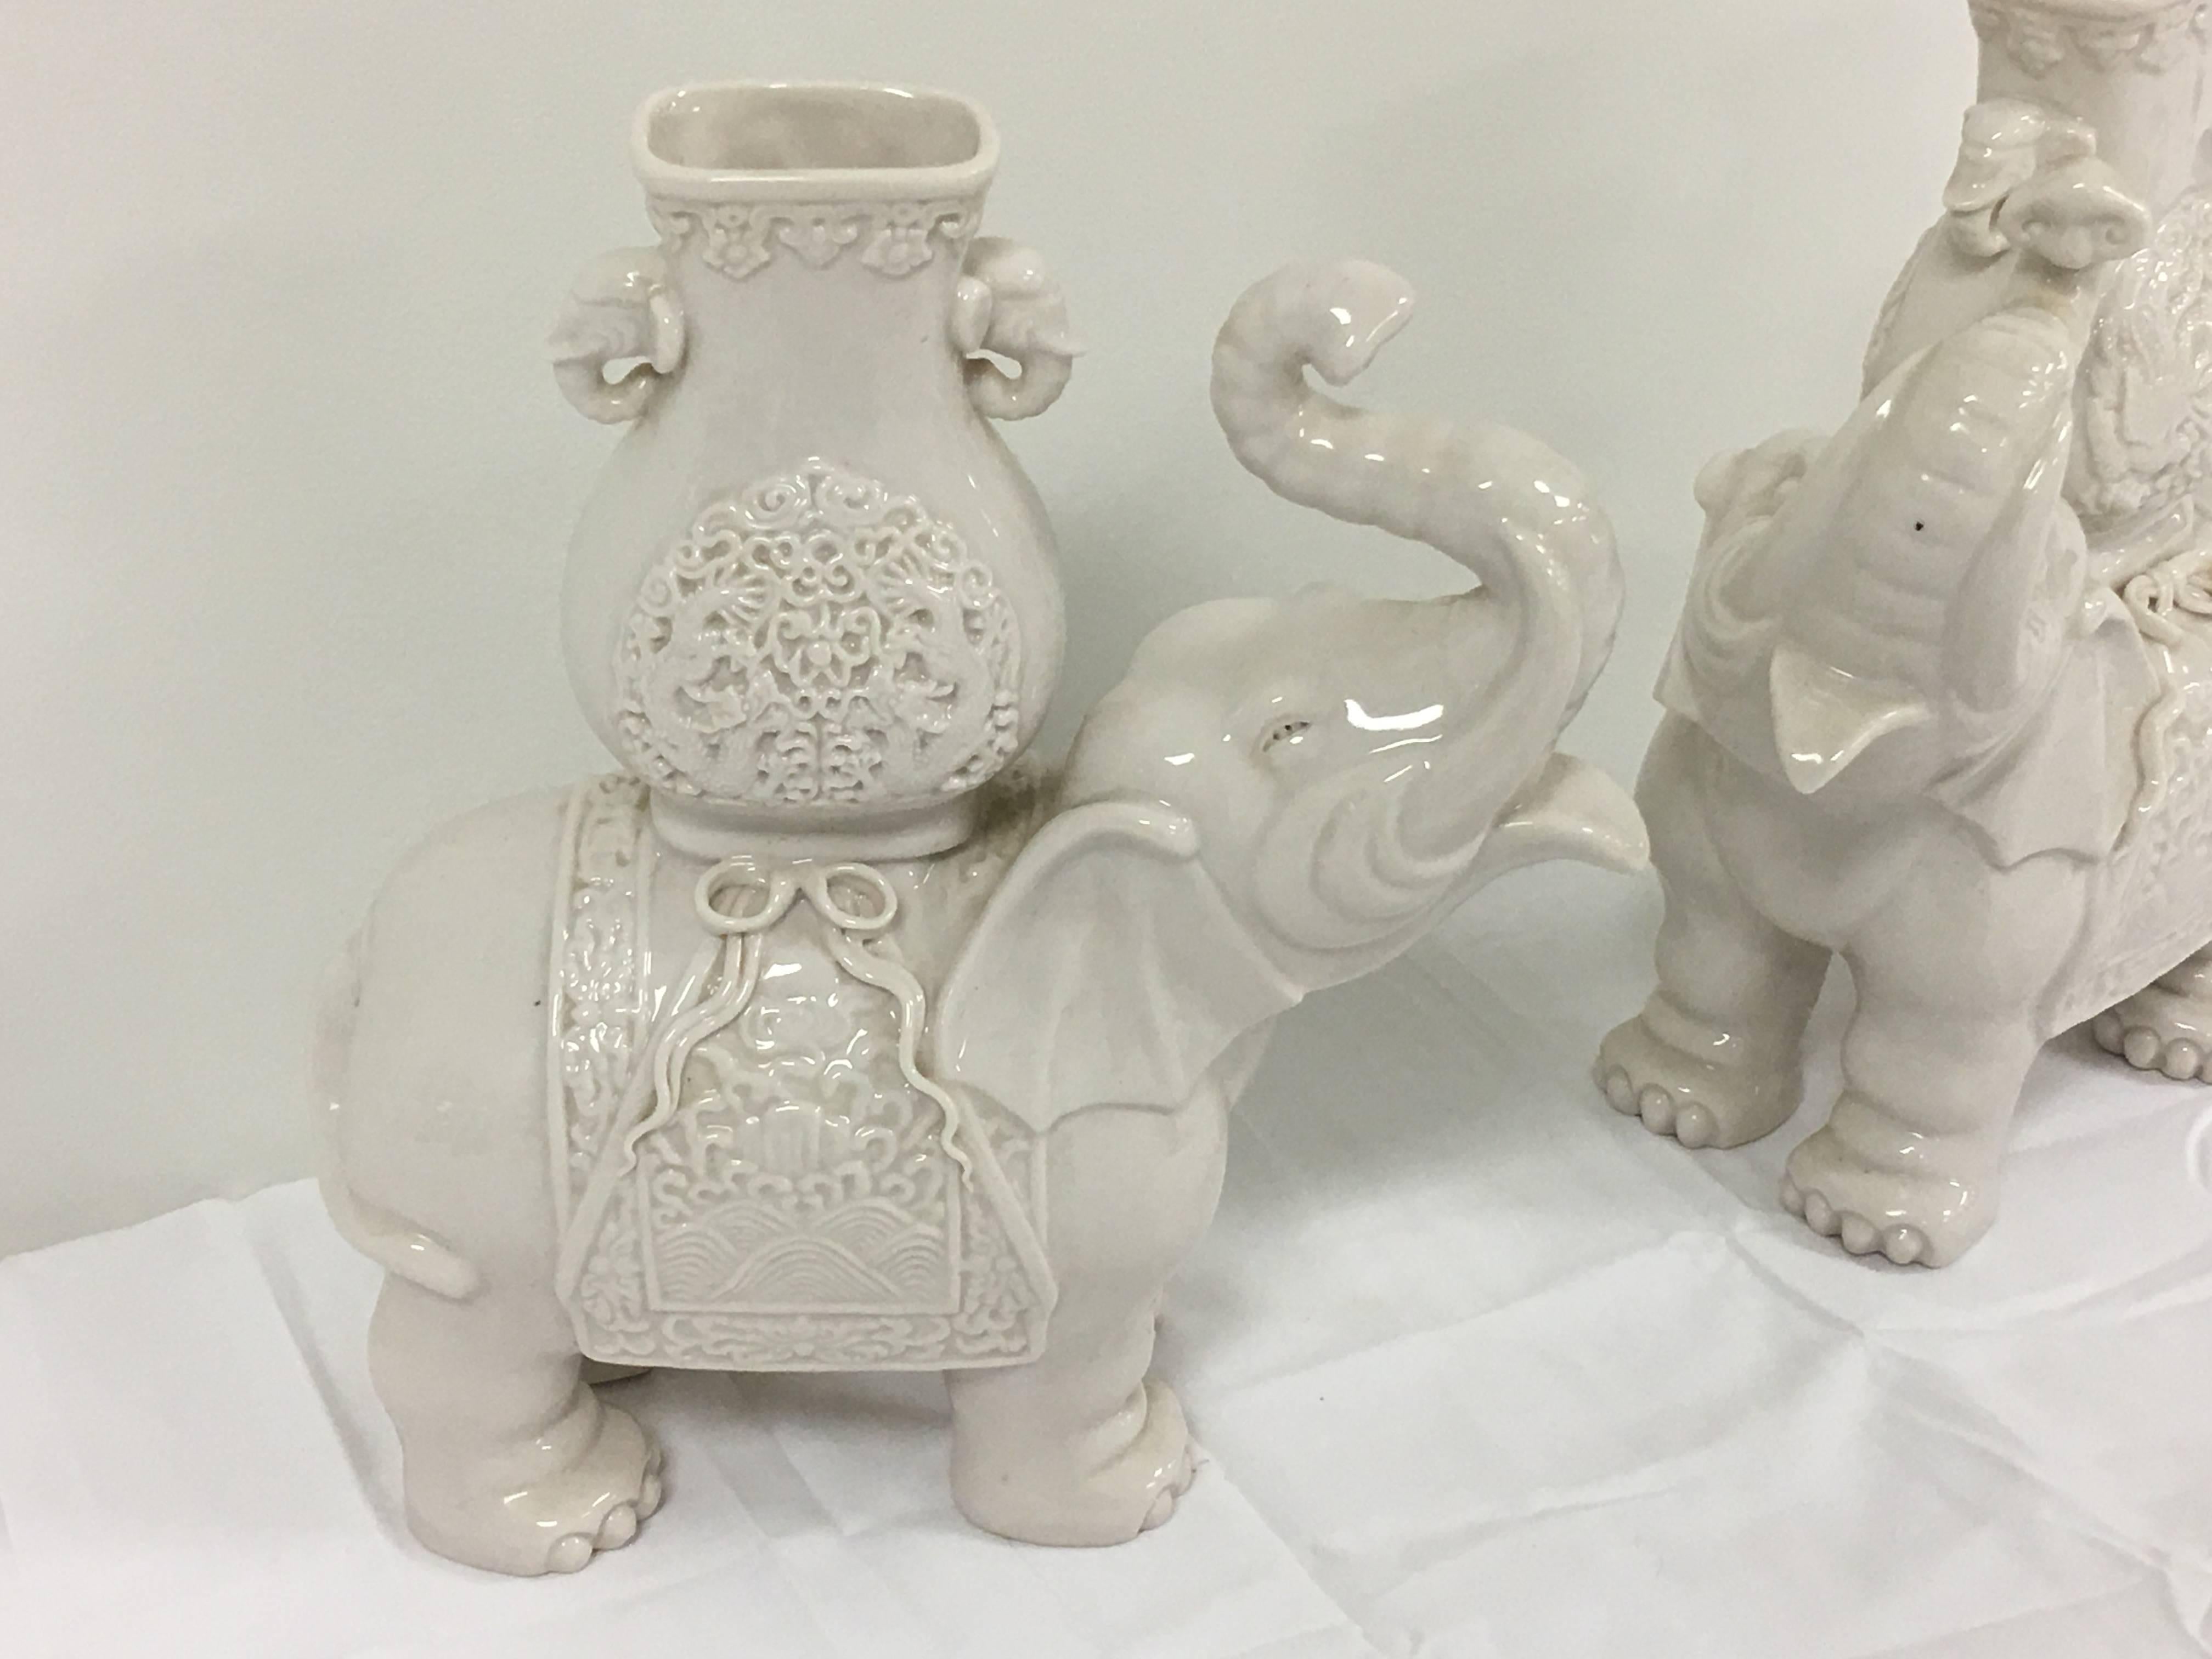 Offered is a fabulous pair of 1950's Blanc de Chine elephant statue figurines. Each has beautiful detailing, with a 'basket' on their backs.

Total of two pairs available. Price reflects each pair. 